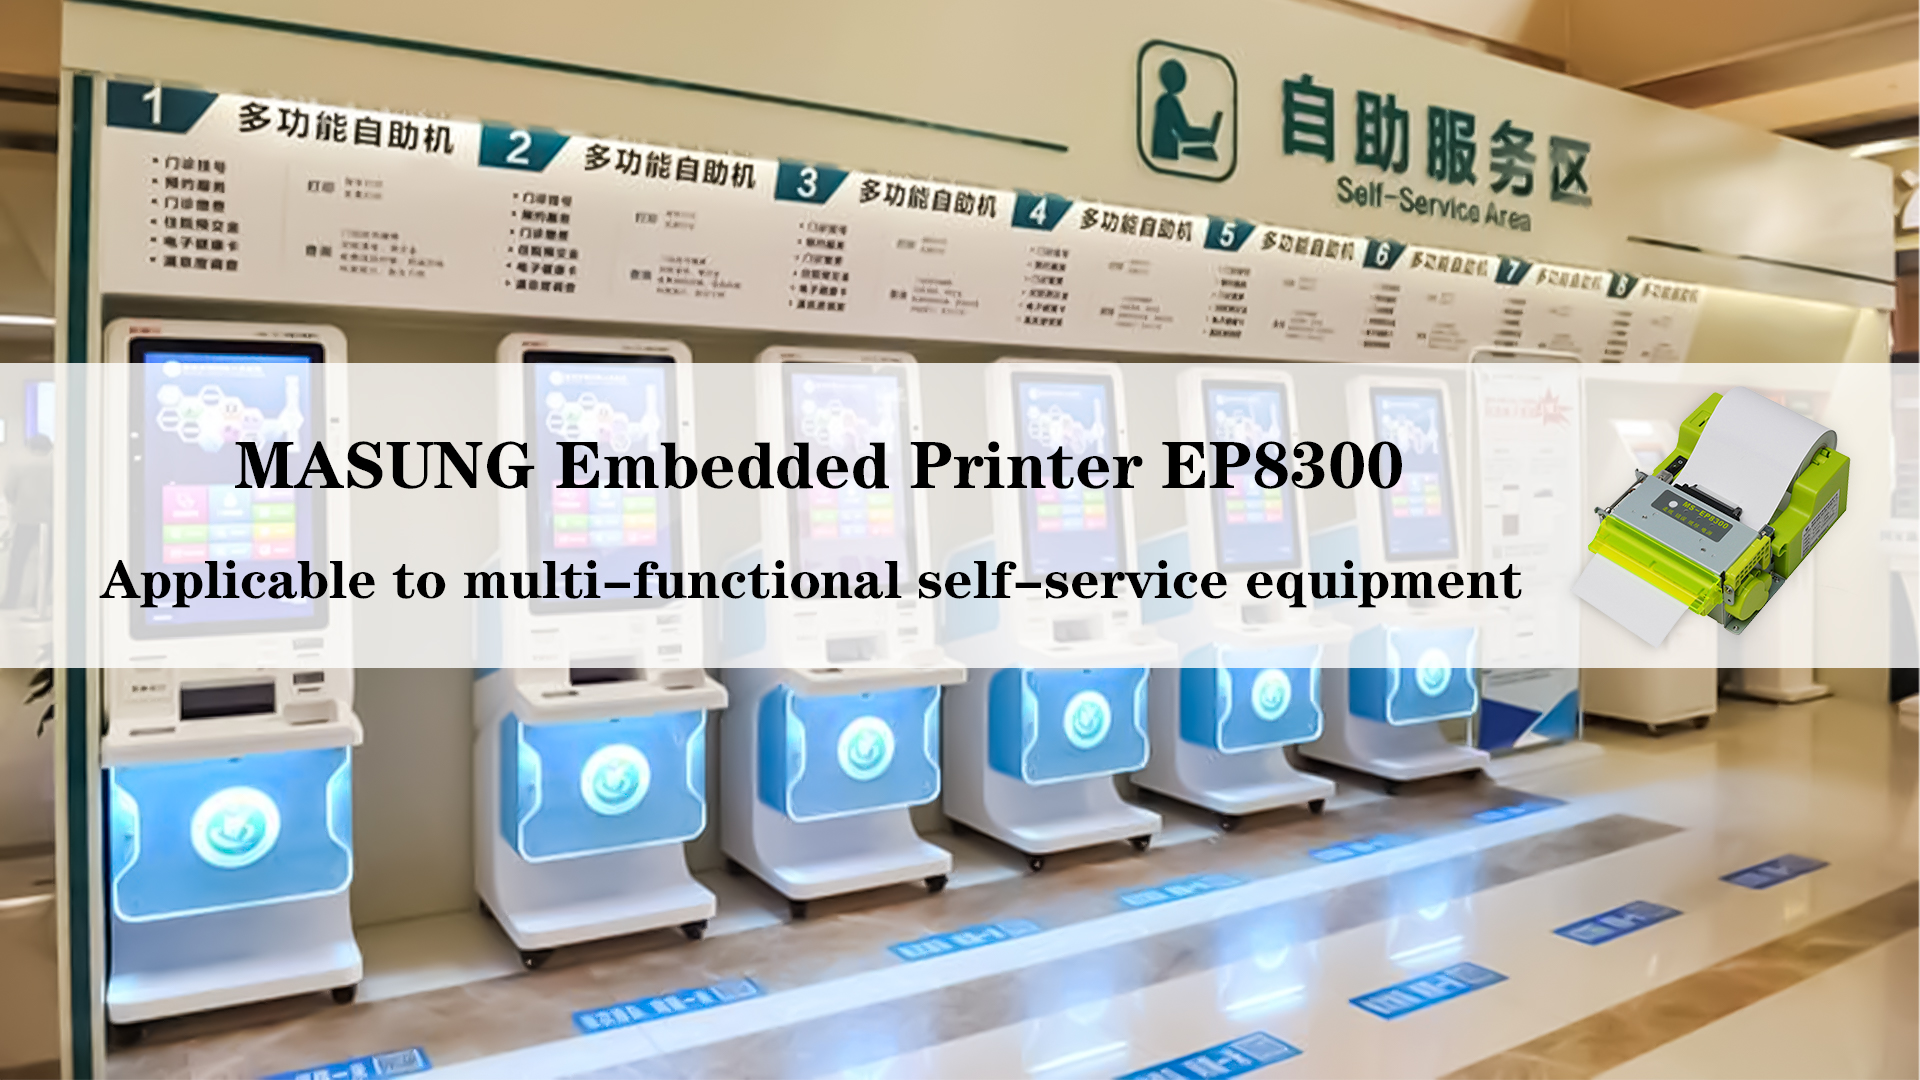 Features of MASUNG Embedded Printer MS-EP8300